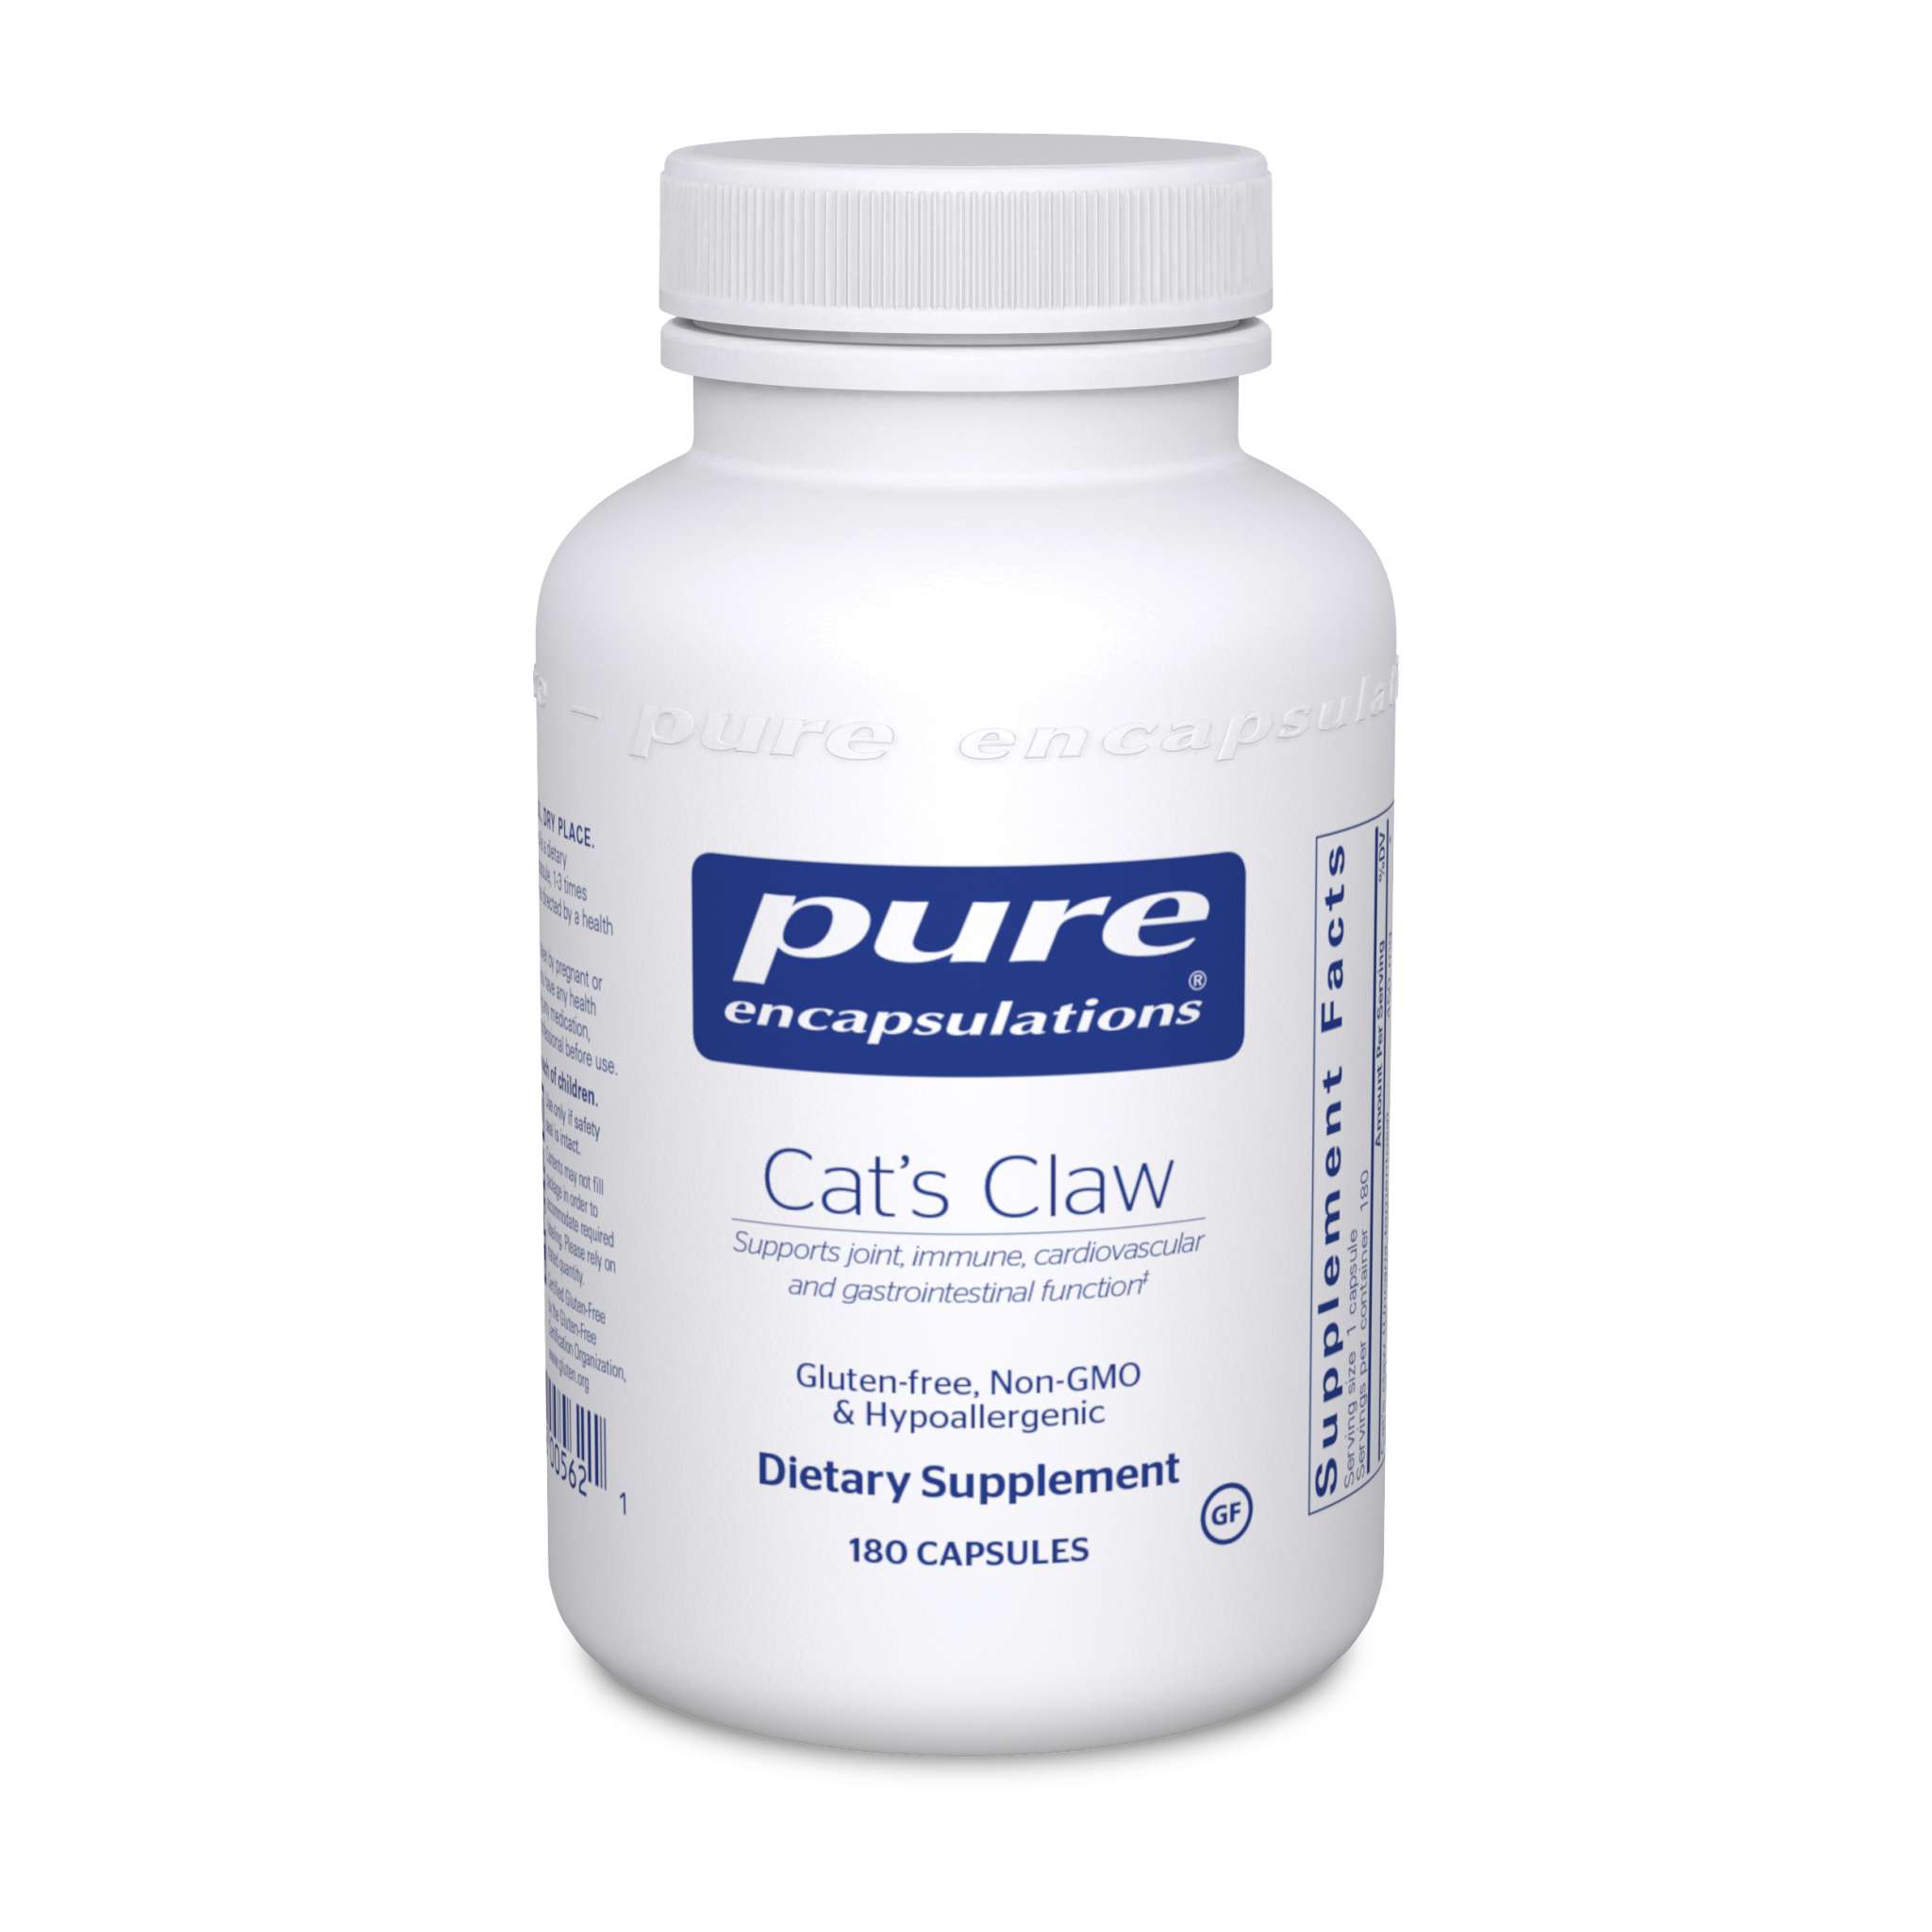 Pure Encapsulations - Cats Claw